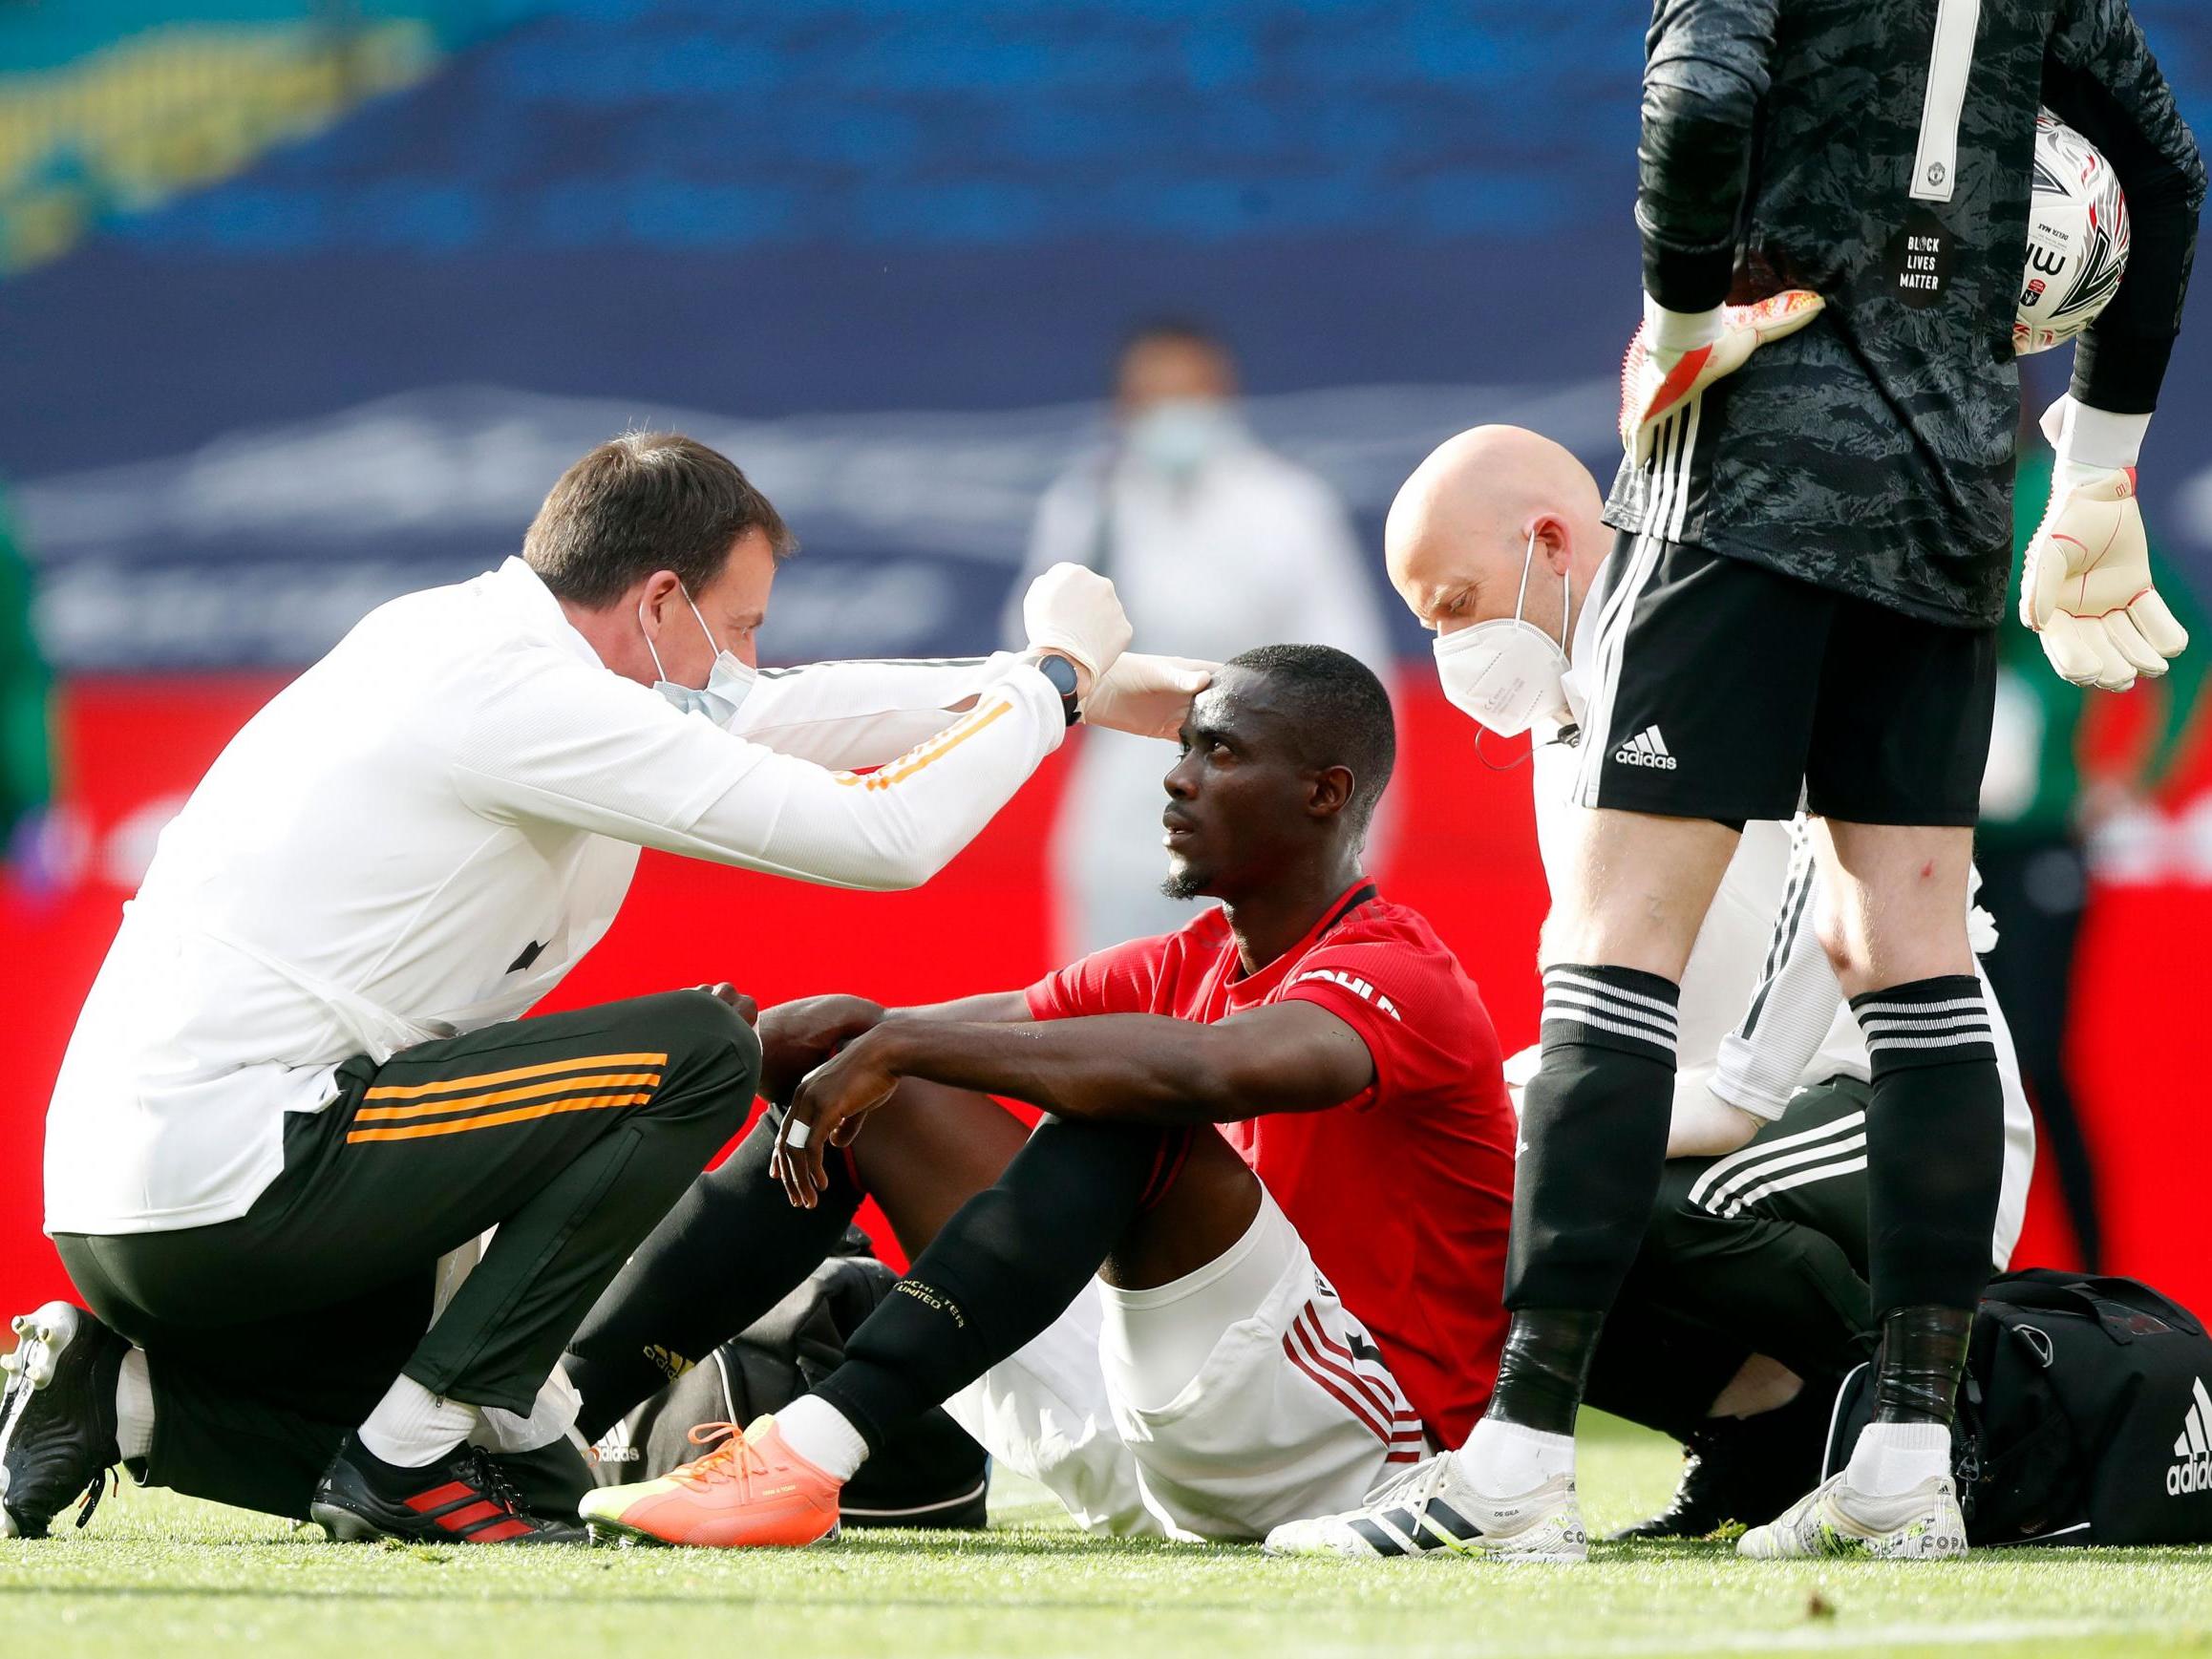 Eric Bailly: Manchester United star forced off on stretcher with head injury after Harry Maguire collision